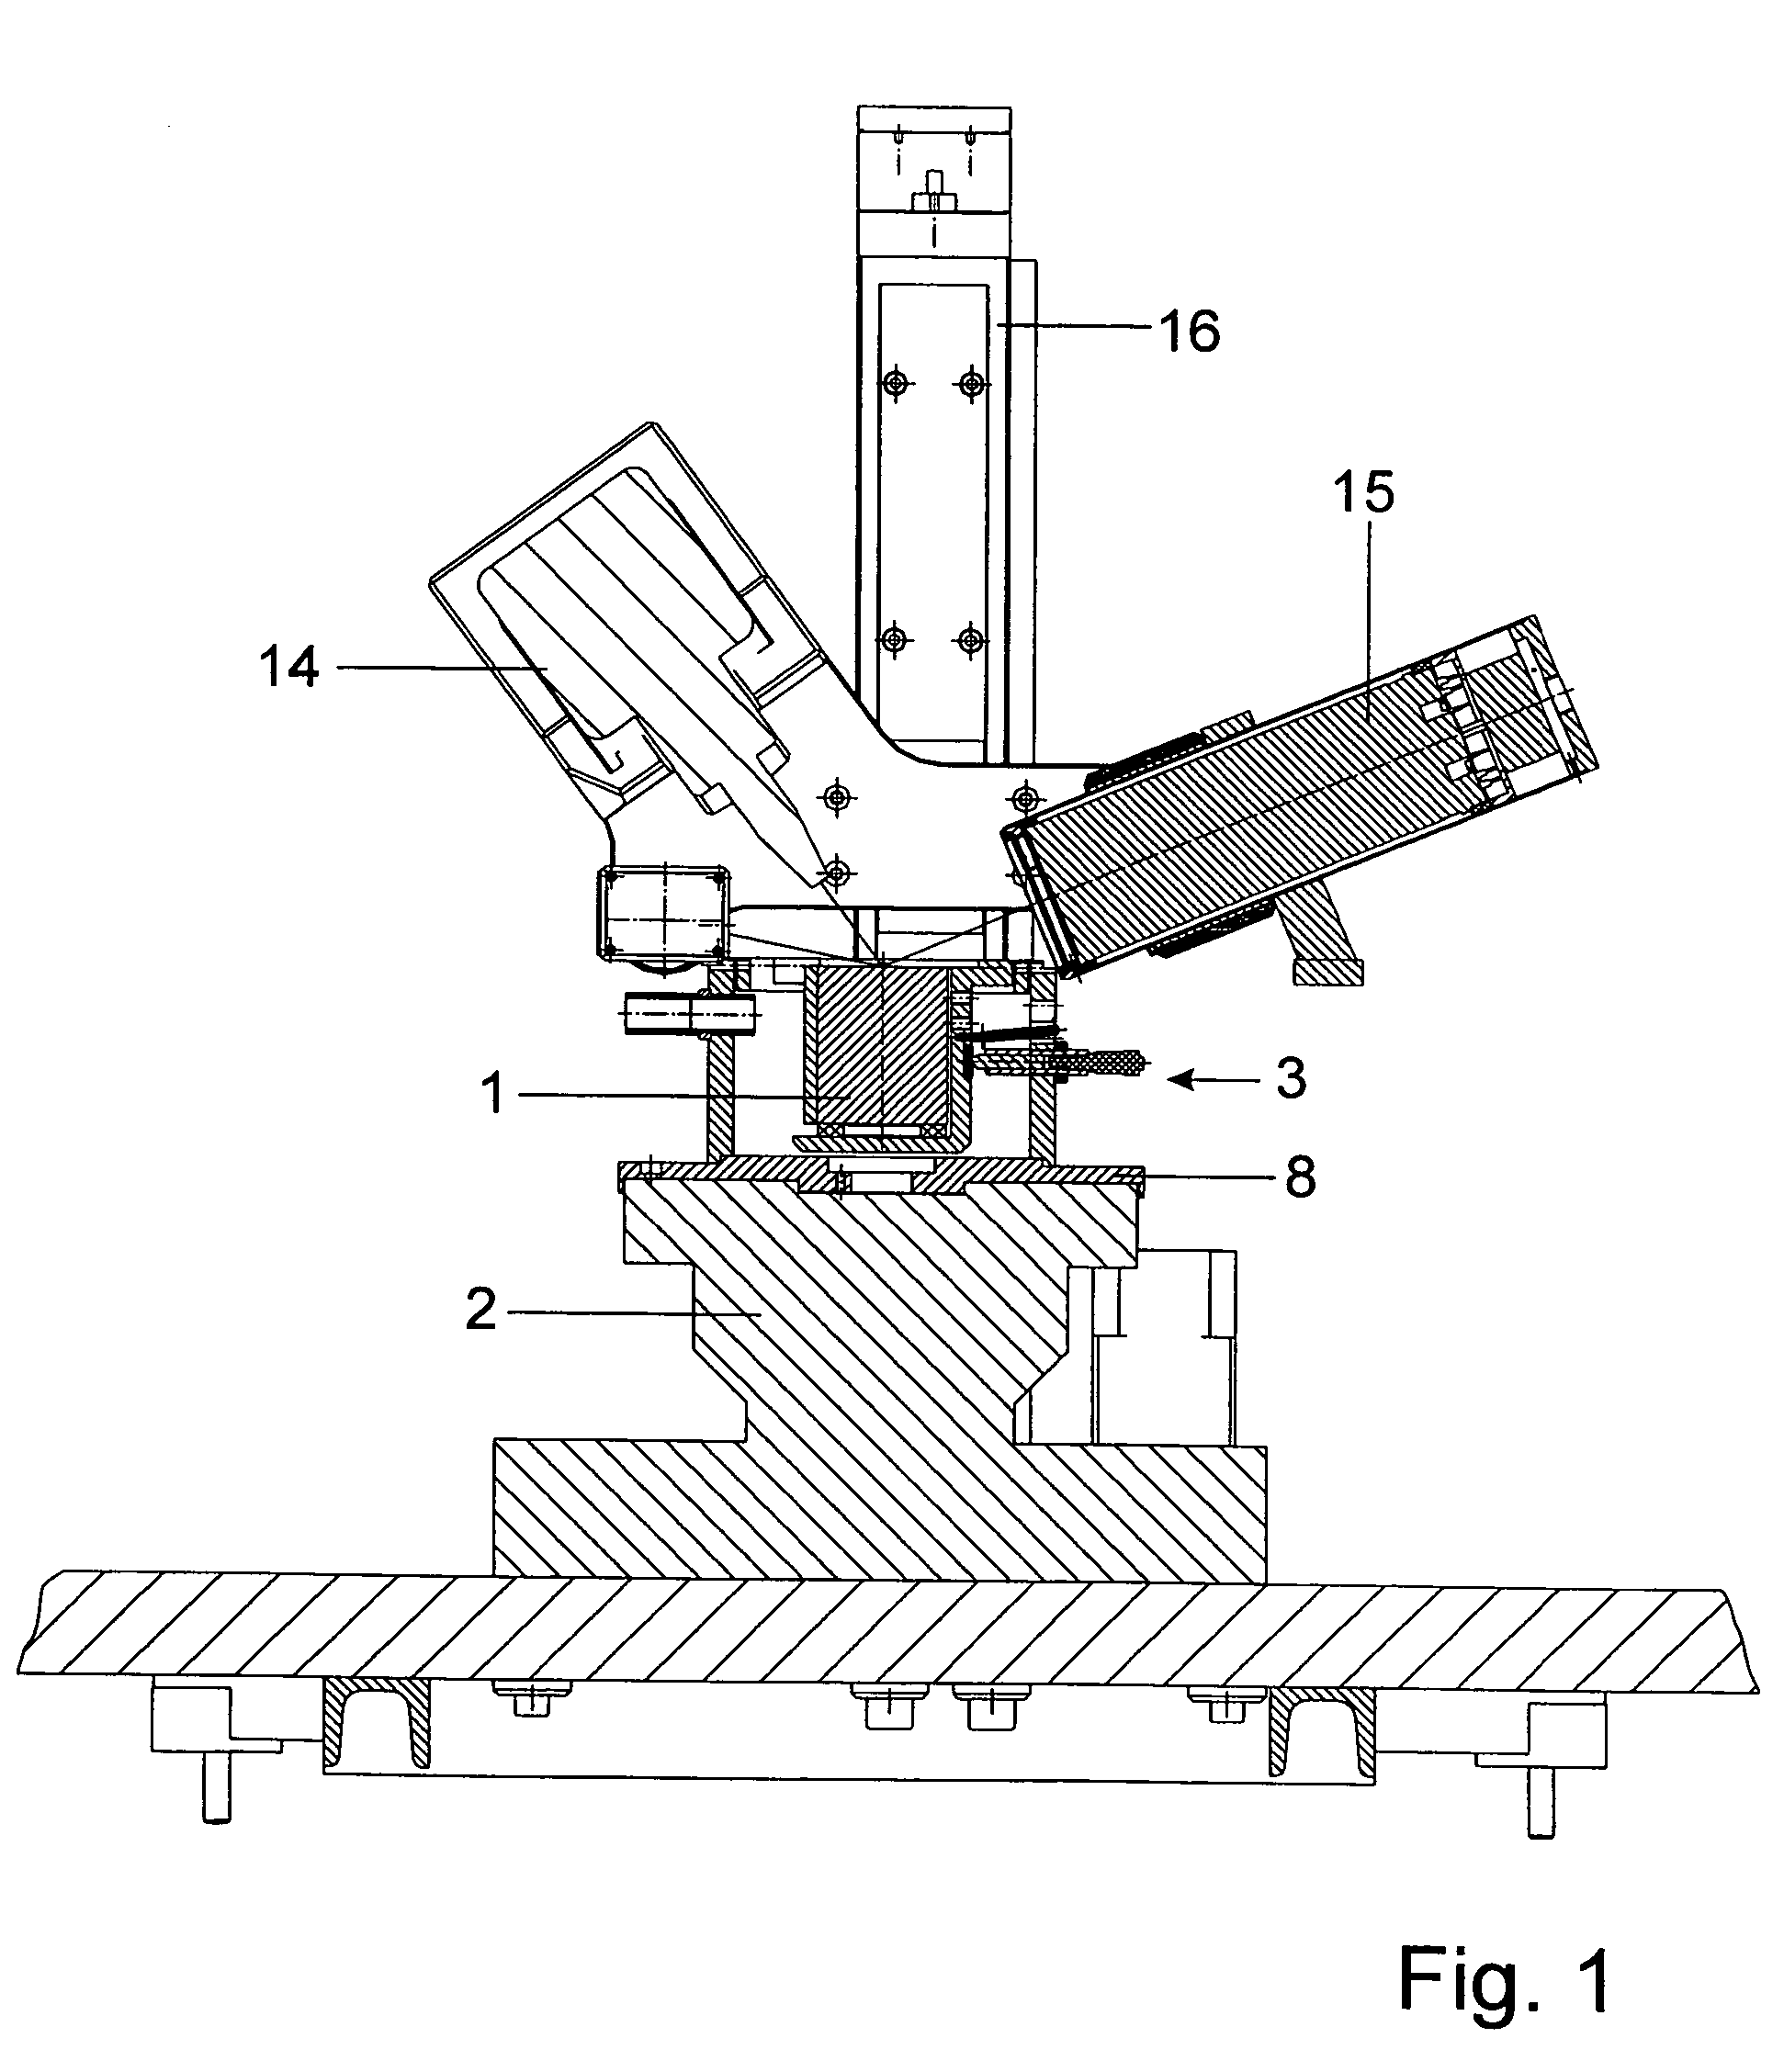 Method and apparatus for the measurement, orientation and fixation of at least one single crystal